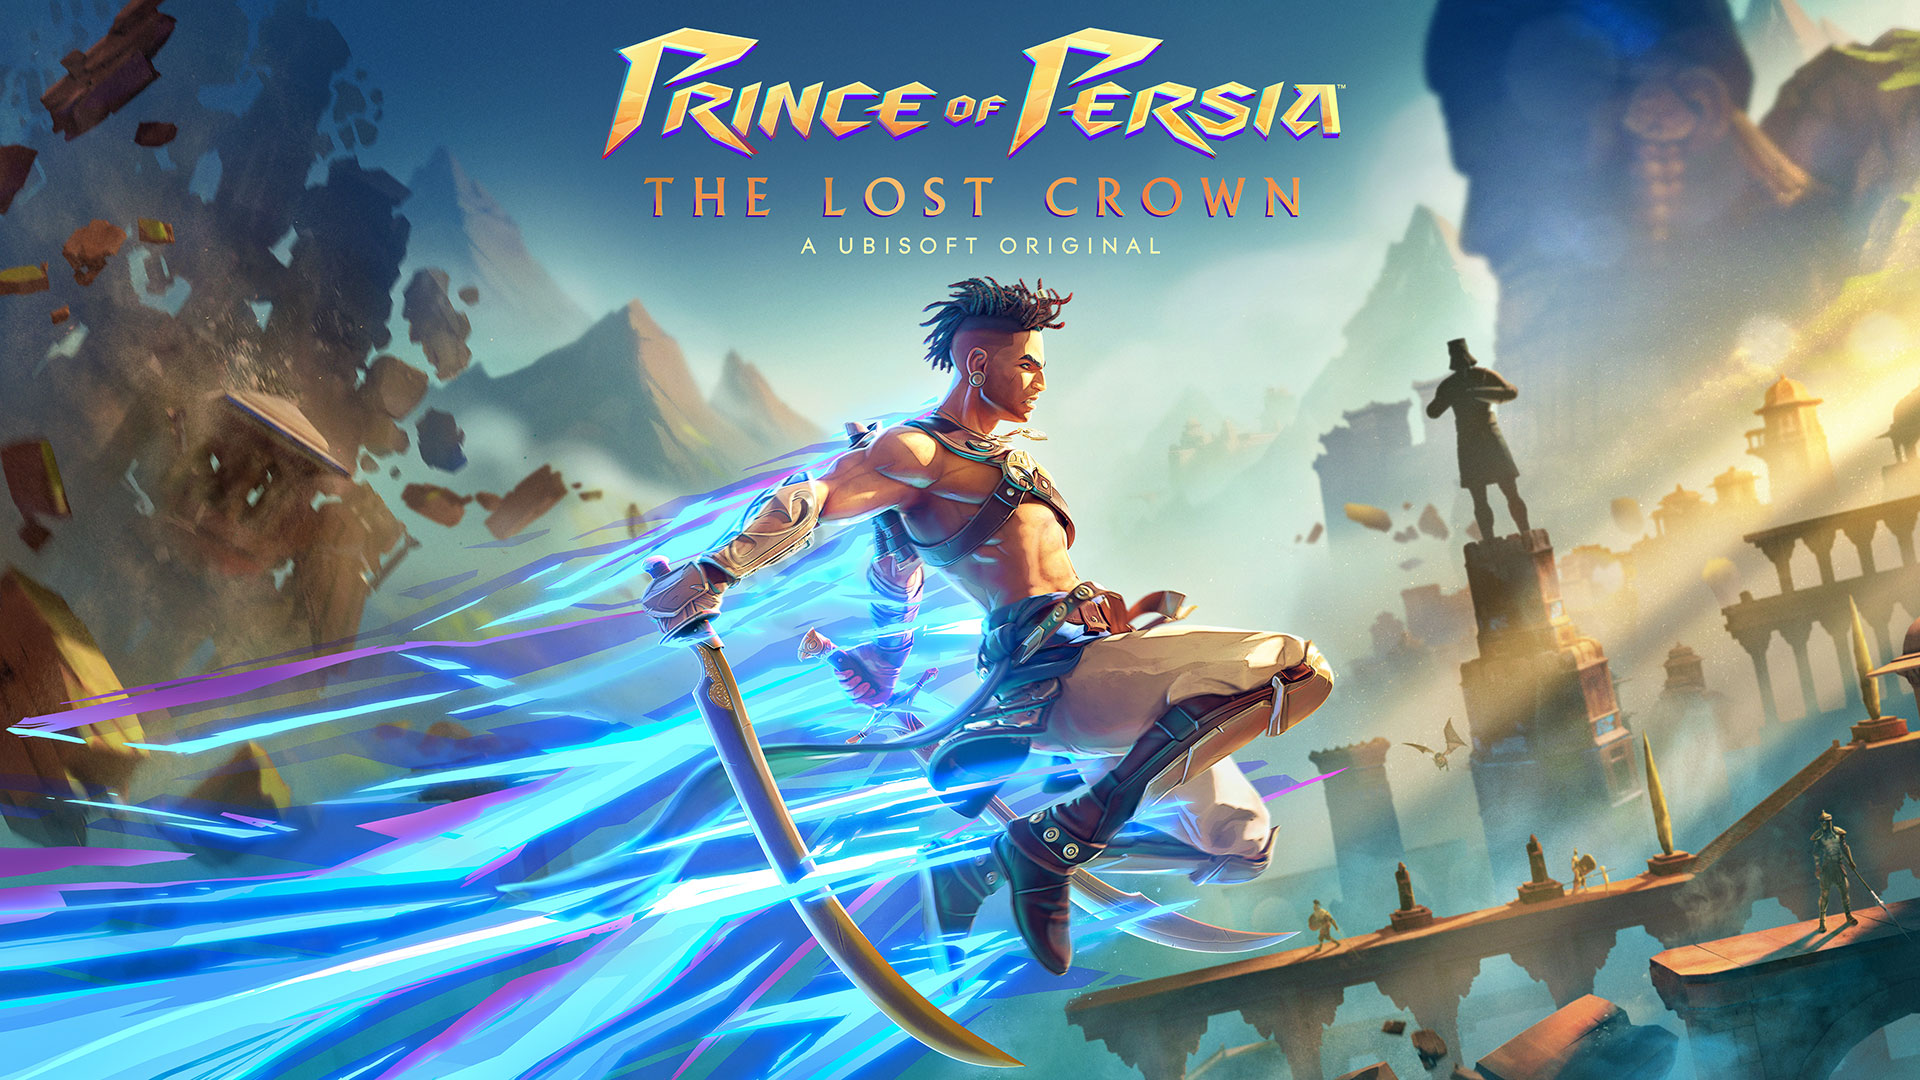 Prince of Persia: The Lost Crown doesn't demand much to run at 4K, 60fps on PC